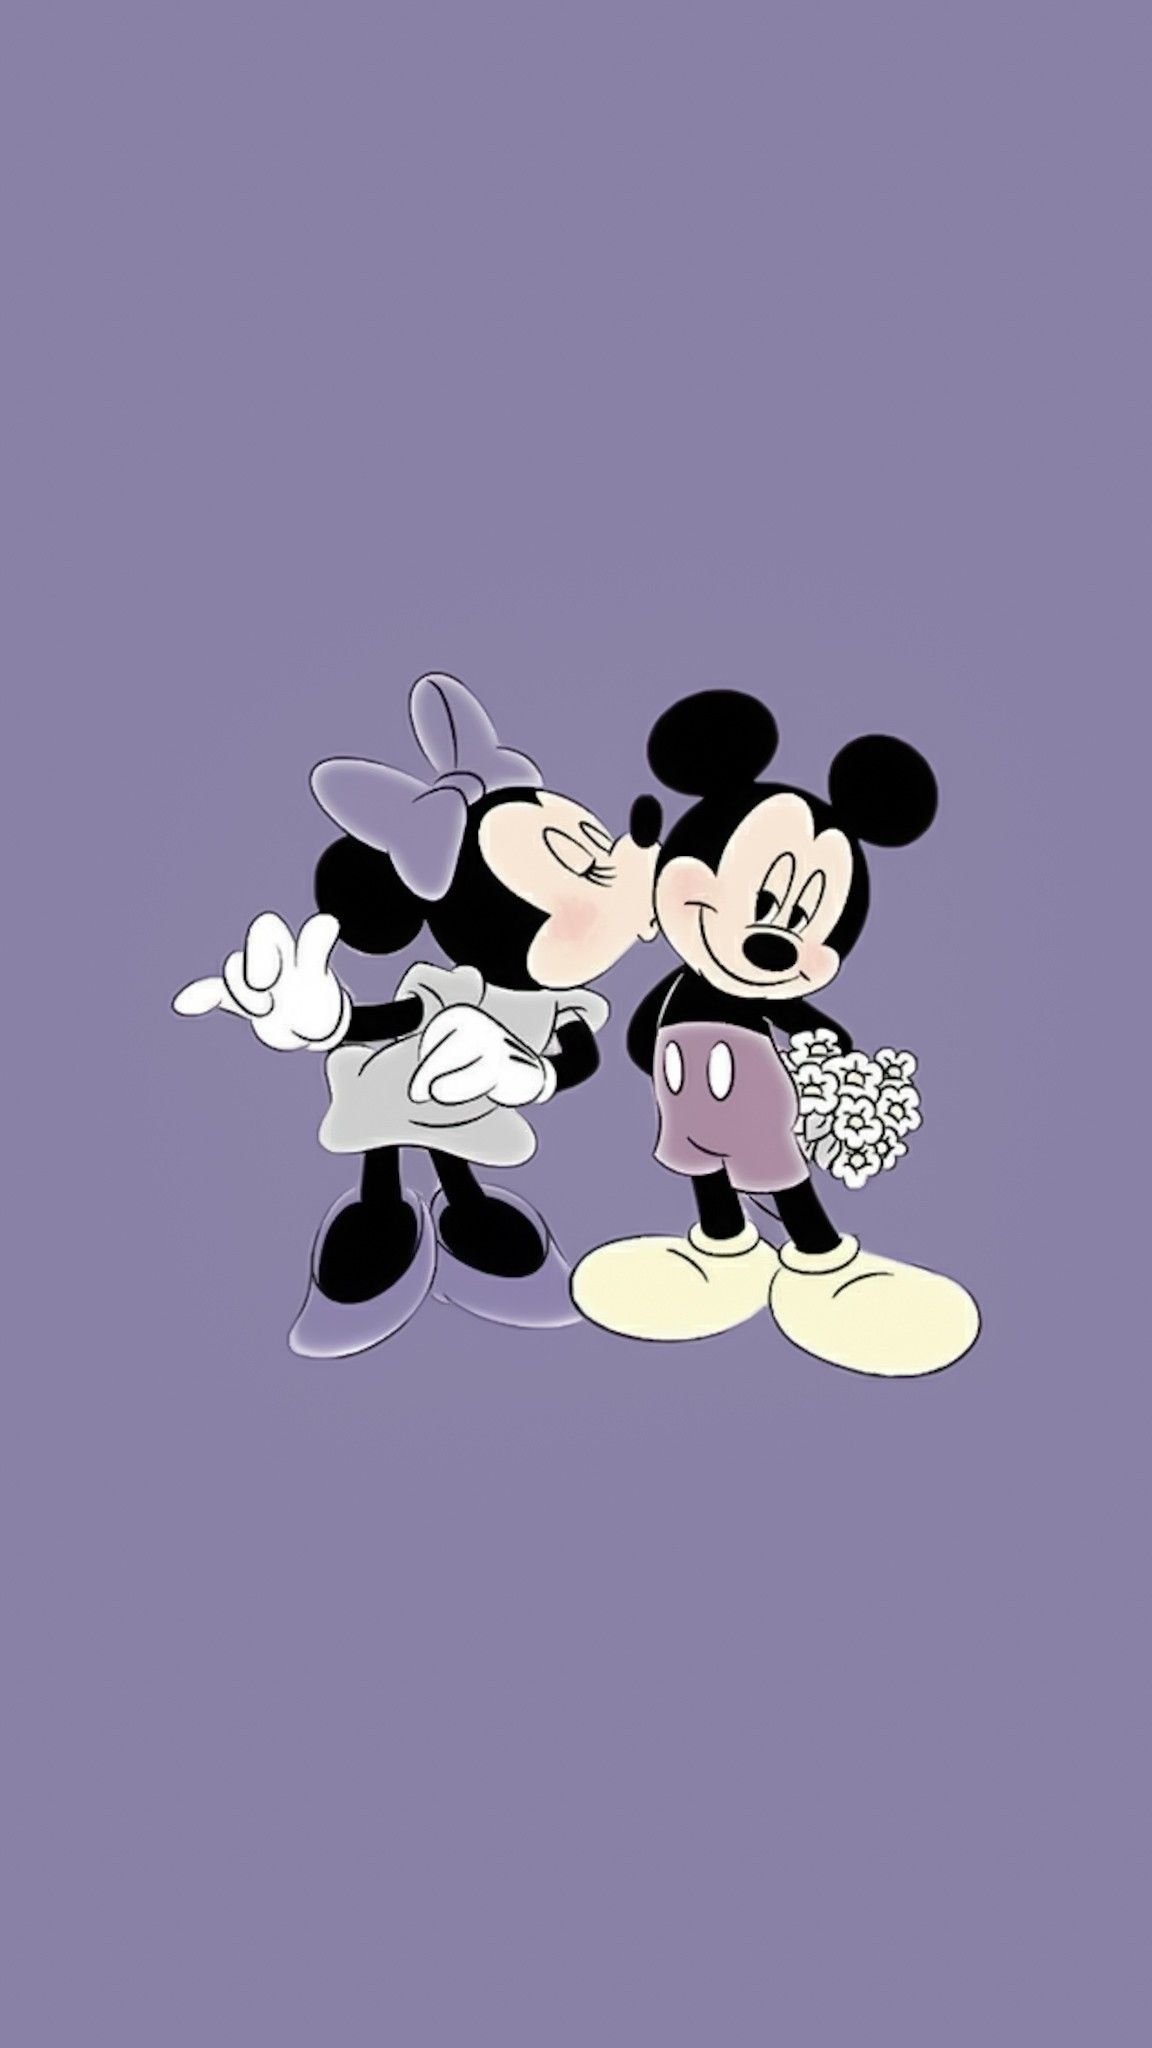 Desktop Live Wallpaper Hd For Windows 7  Minnie Mouse Love Mickey Mouse  PngMickey Mouse Png Images  free transparent png images  pngaaacom